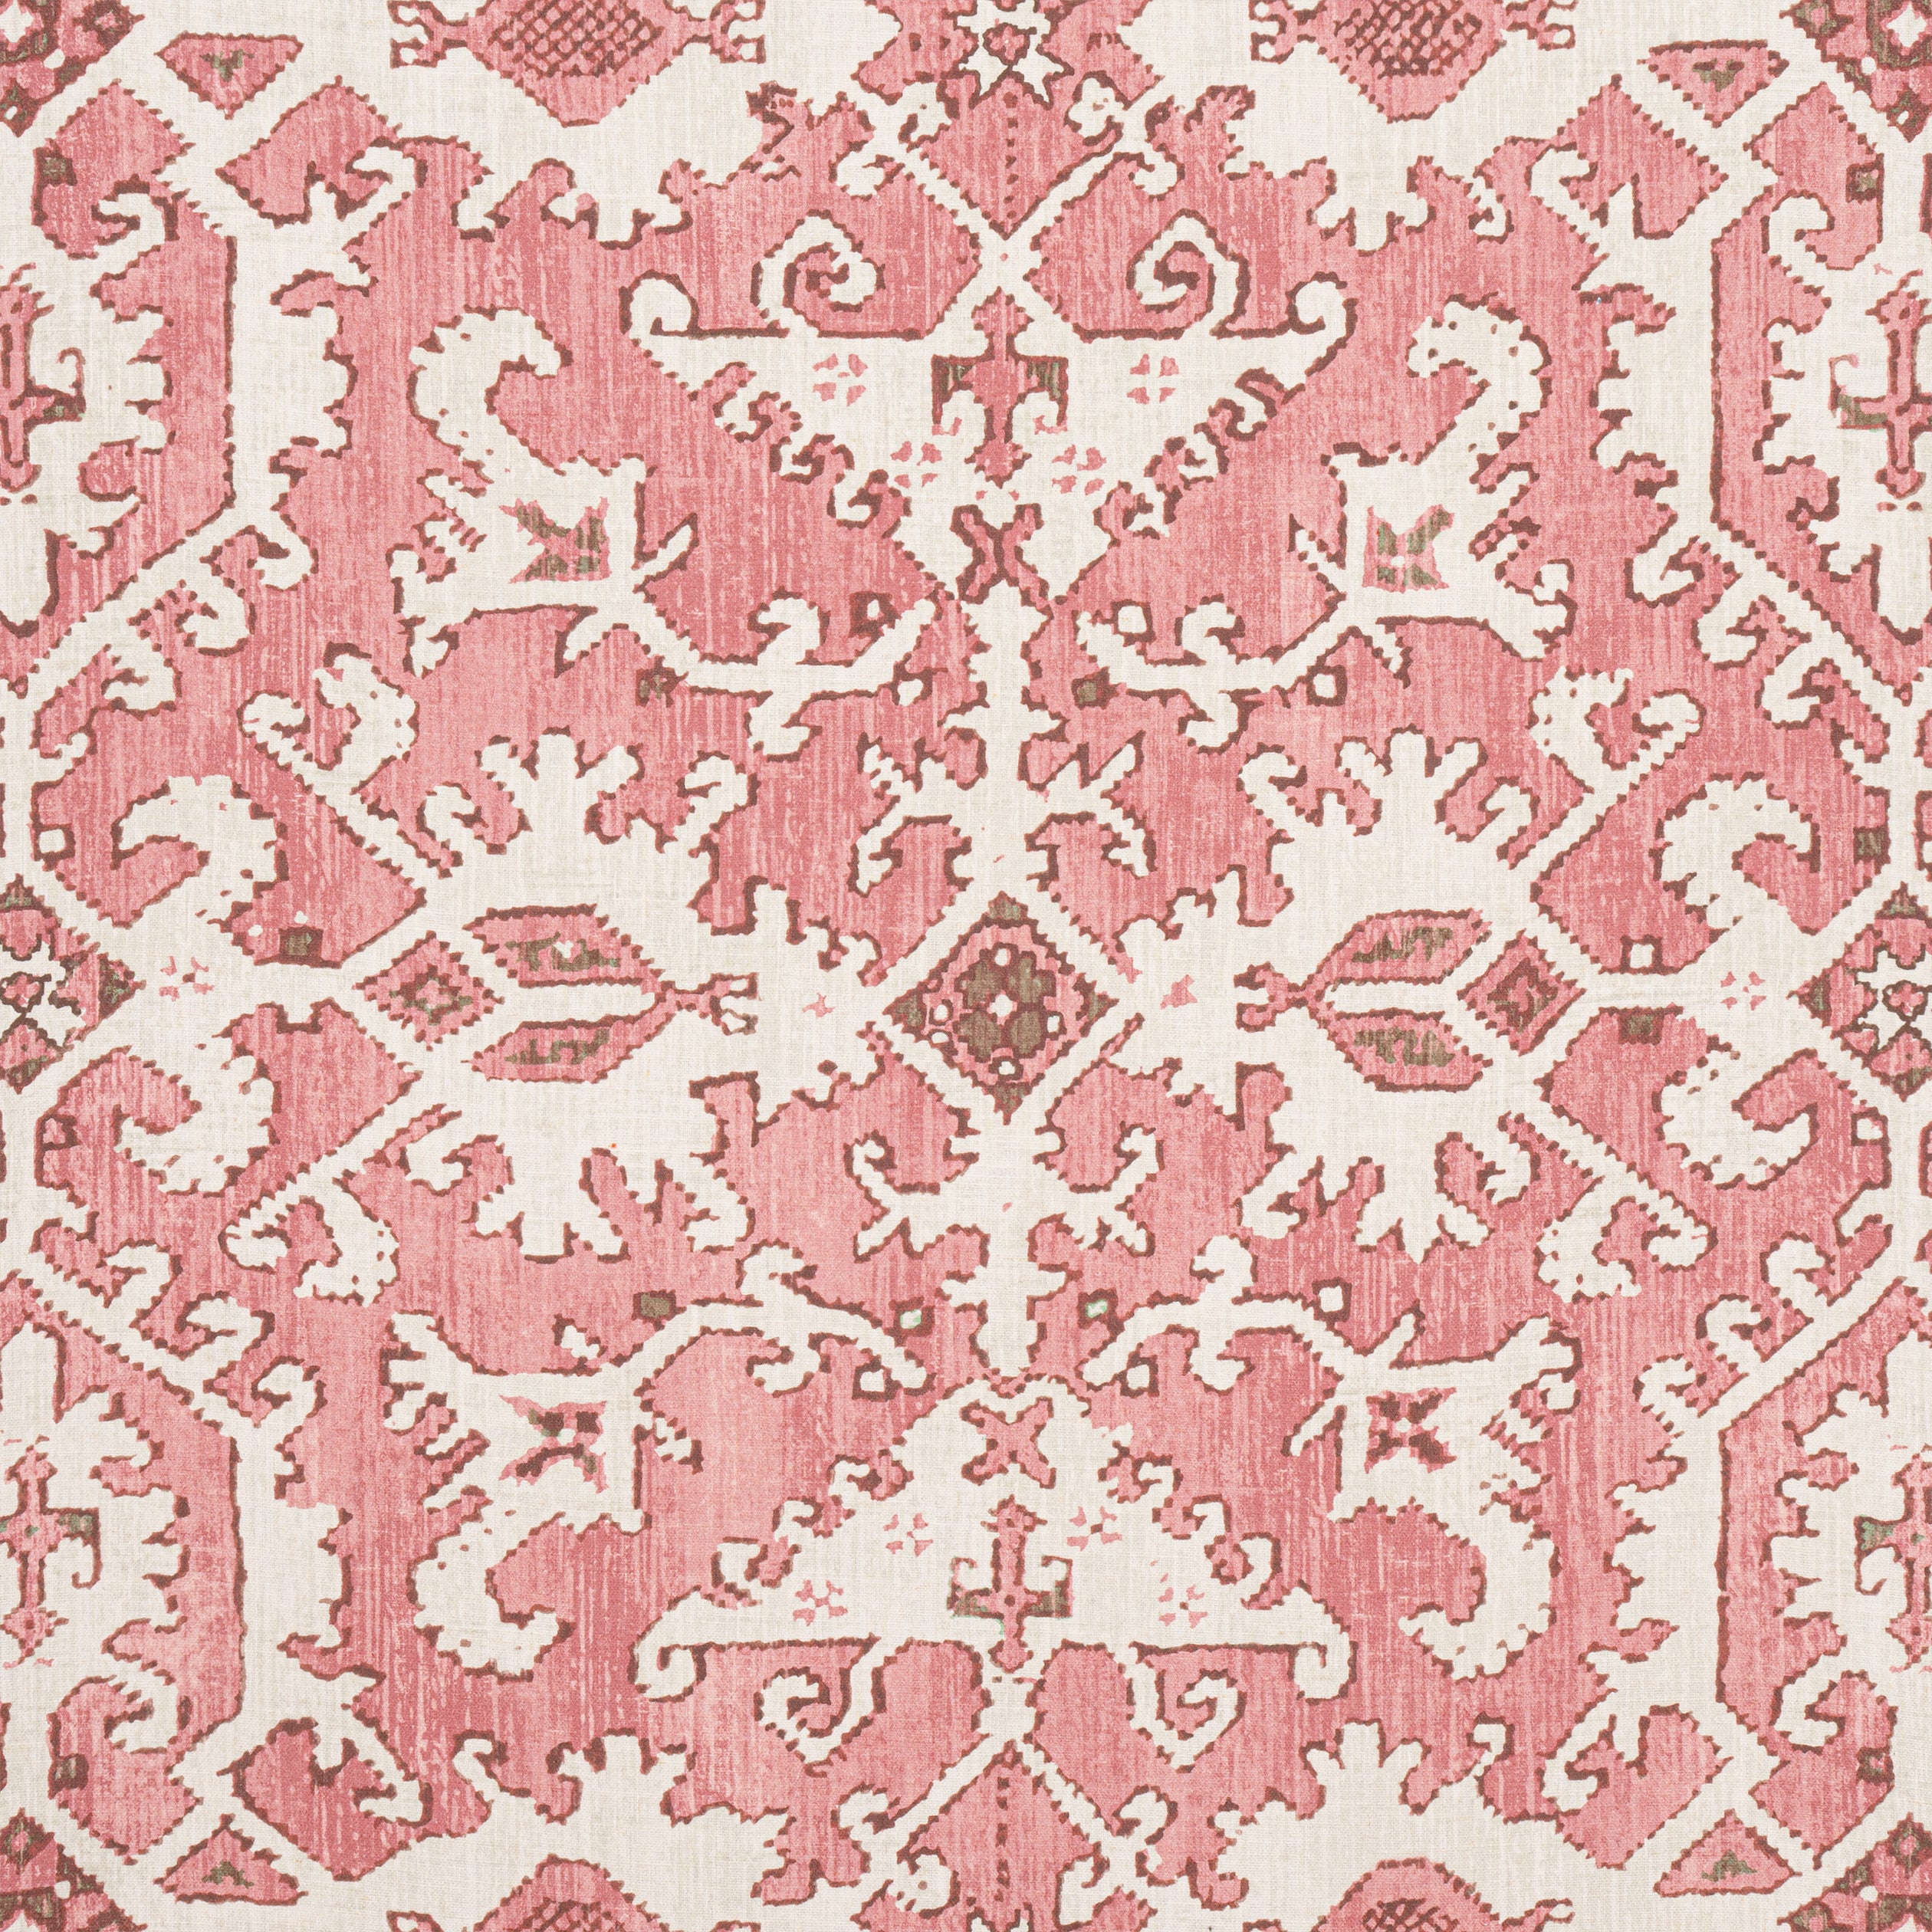 Pontorma fabric in Rose color - pattern number AF24559 - by Anna French in the Devon collection